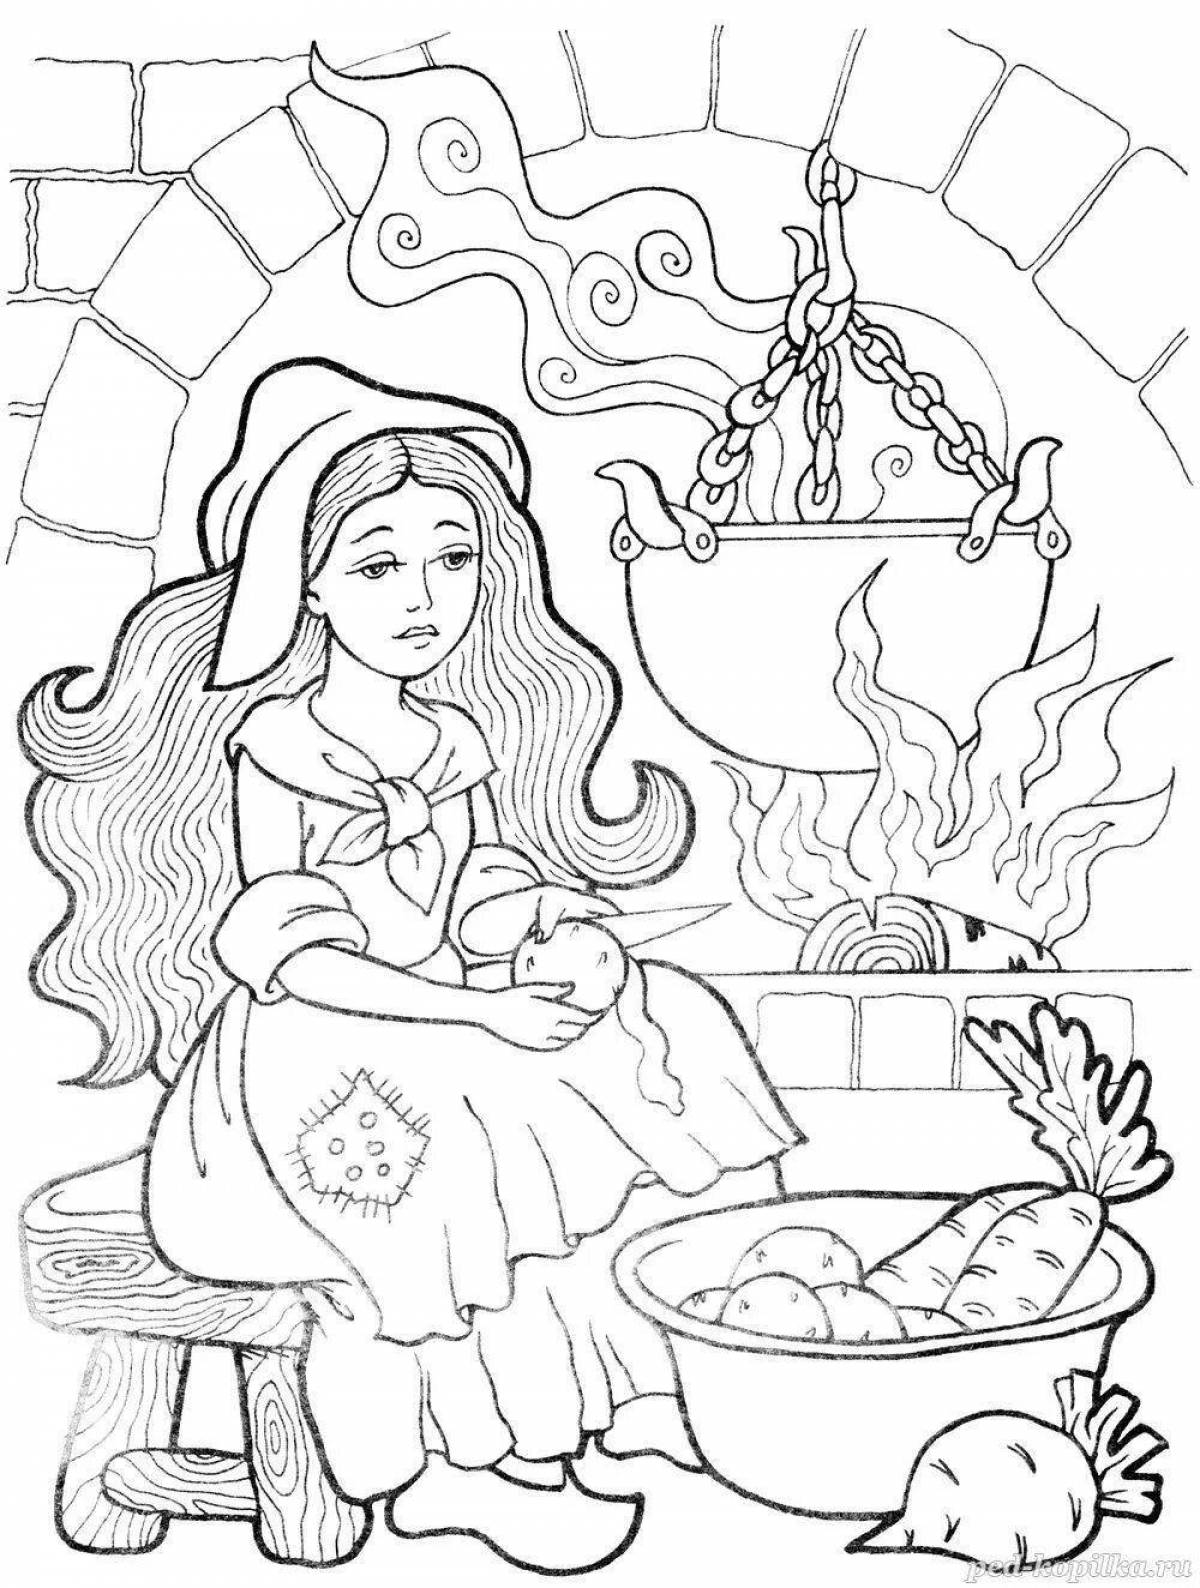 Fantastic coloring book based on fairy tales